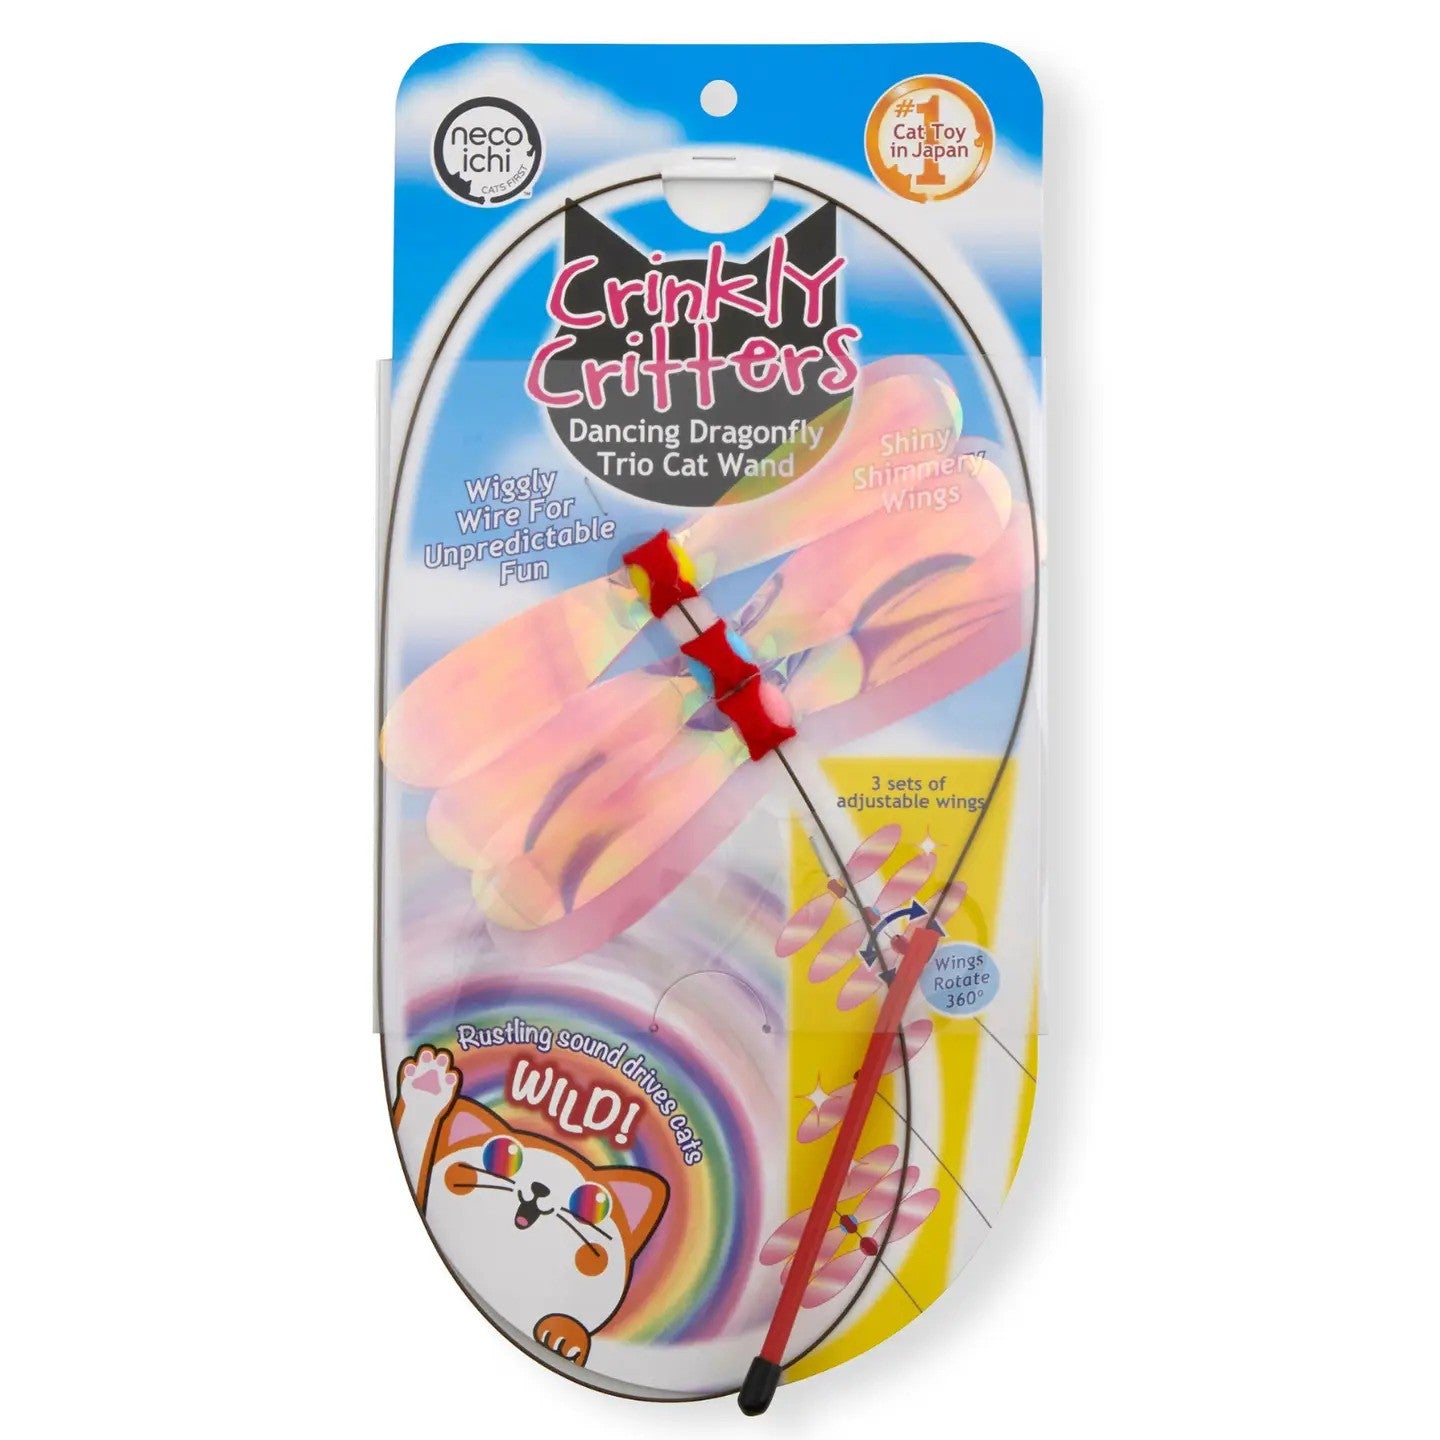 Crinkly Critters Dancing Dragonfly Trio Cat Wand